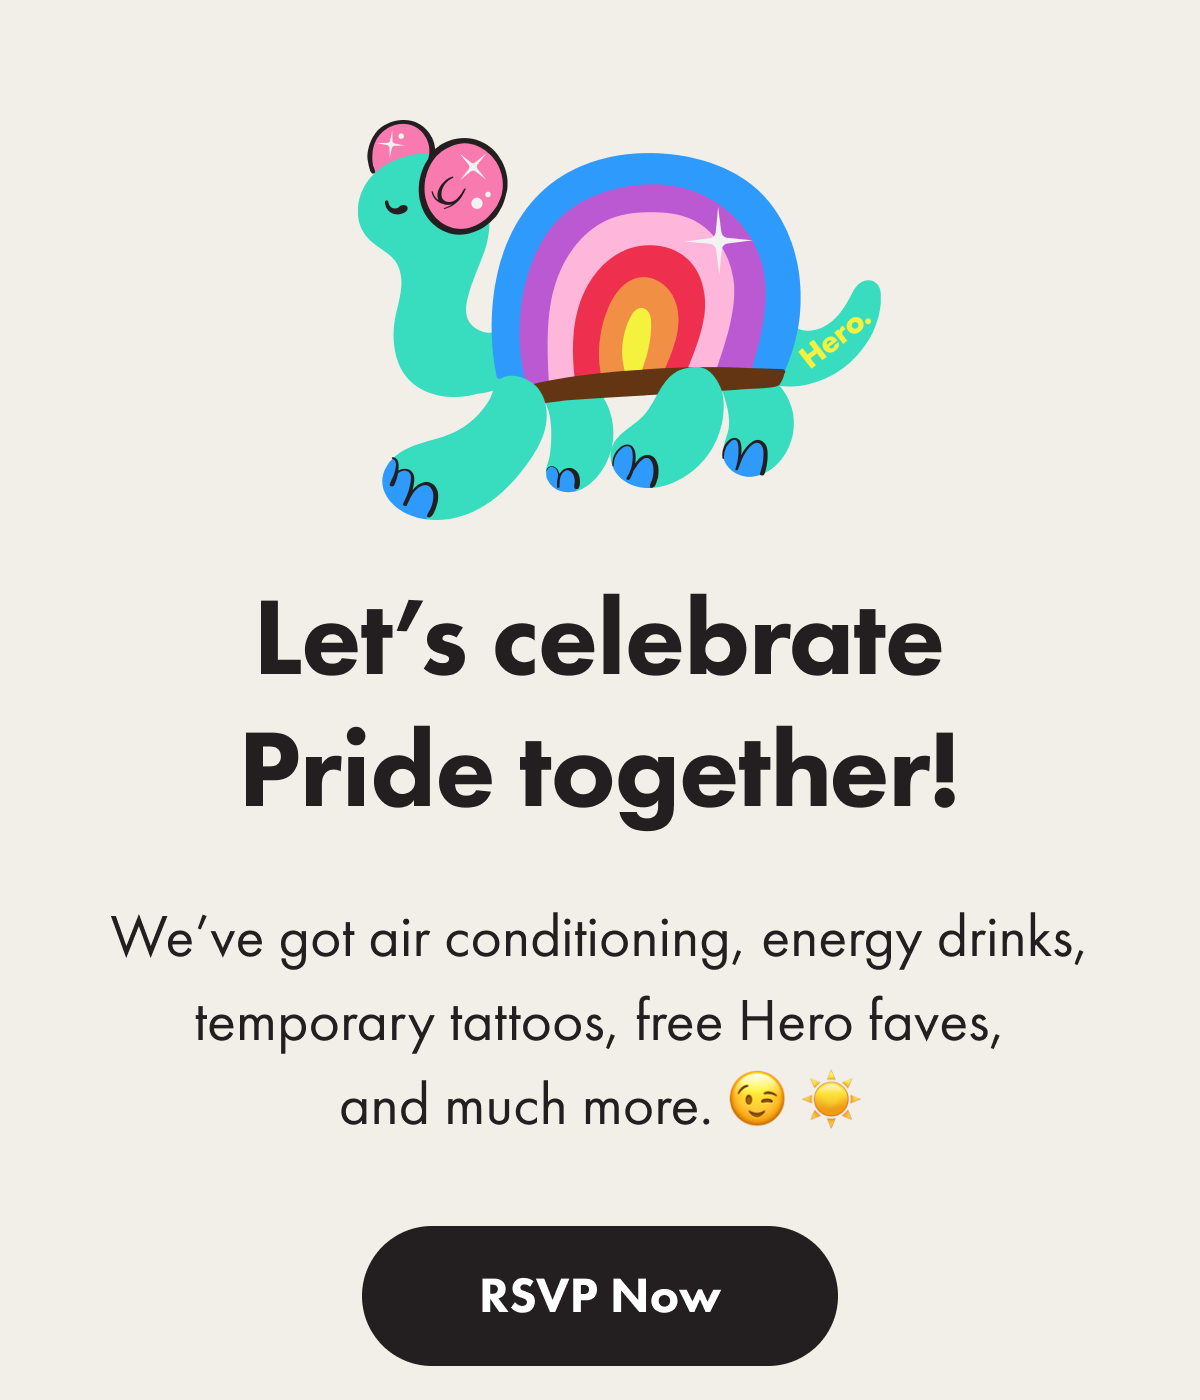 Let's celebrate pride together! We've got air conditioning, energy drinks, temporary tattoos, free hero faves, and much more! RSVP Now. 